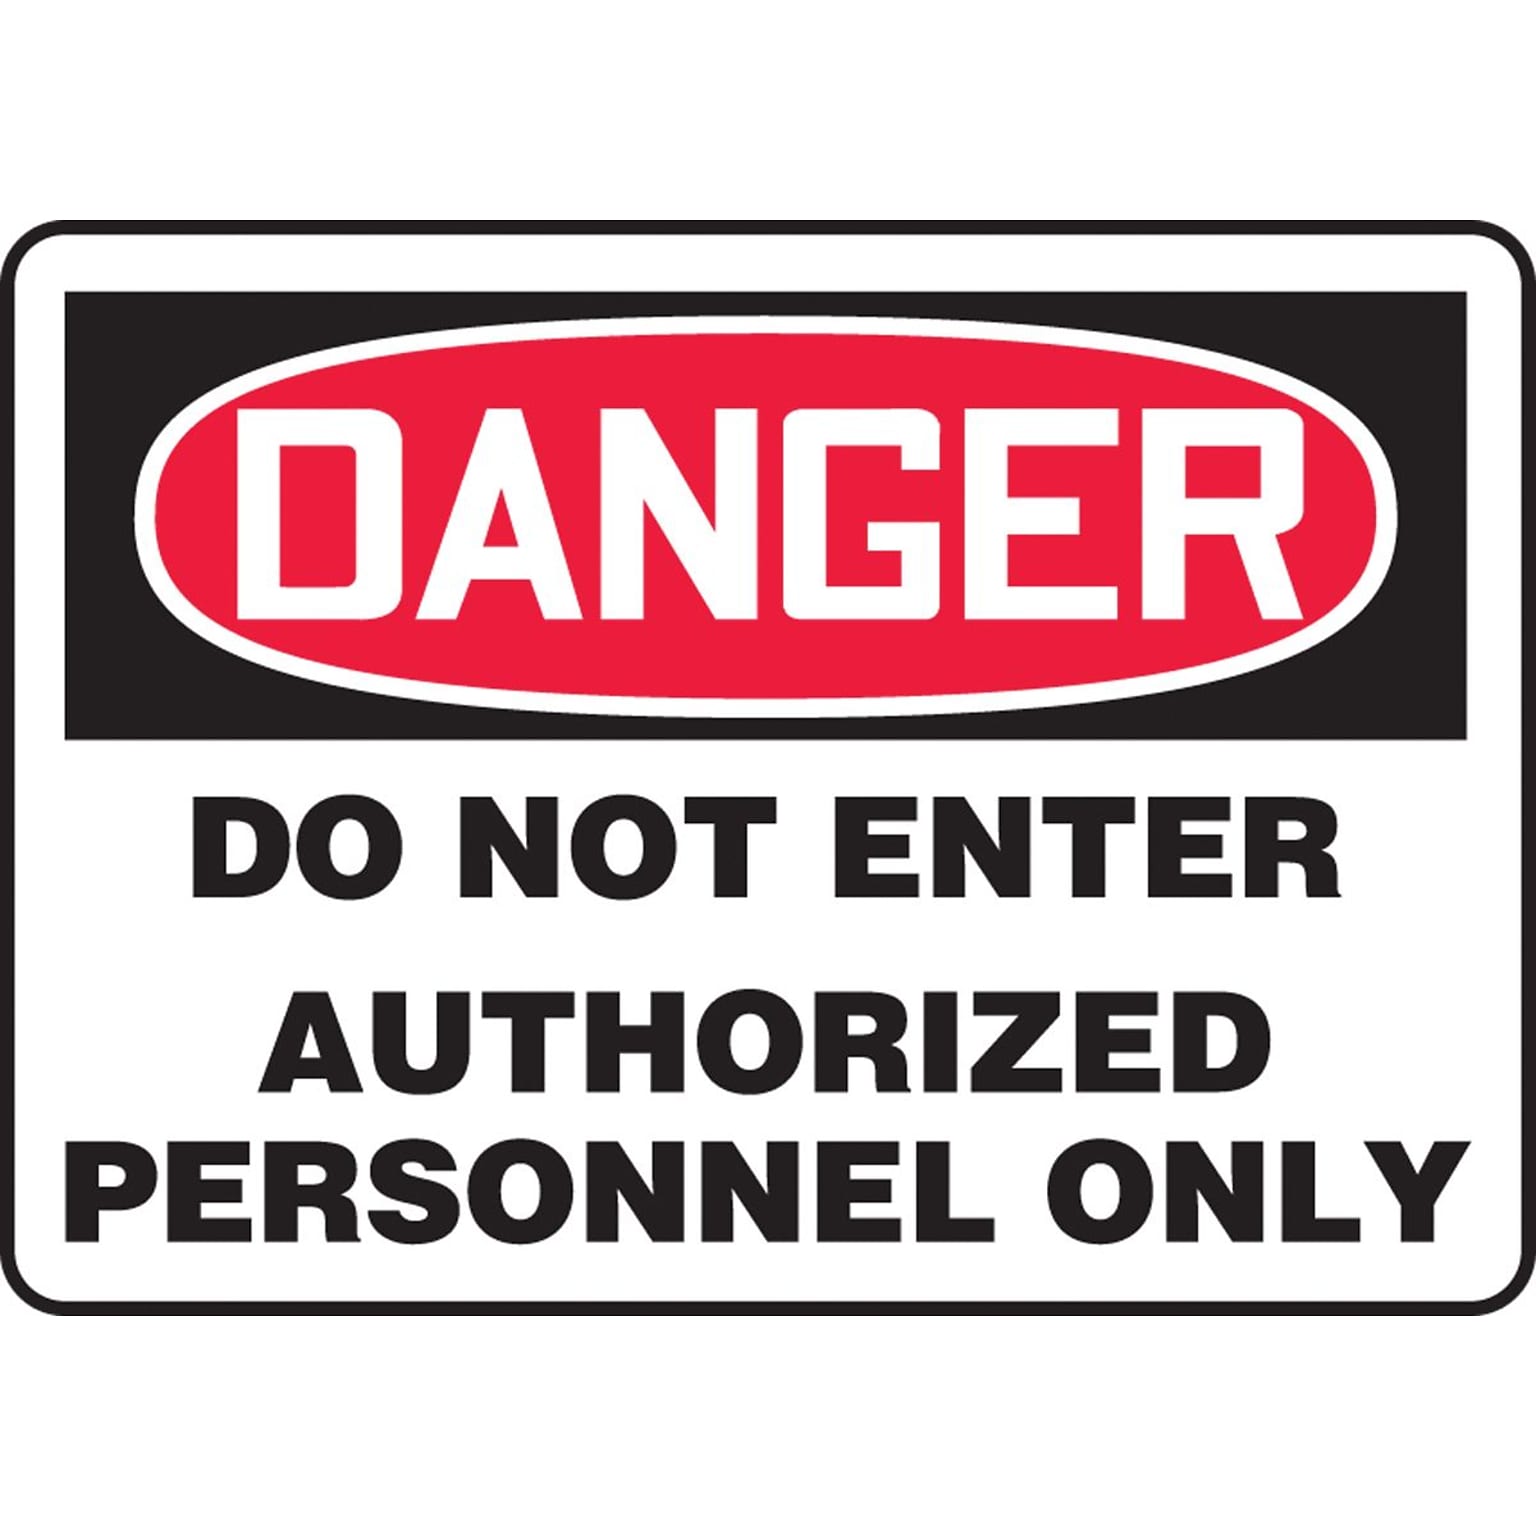 Accuform 7 x 10 Plastic Safety Sign DANGER DO NOT ENTER AUTHORIZE.., Red/Black On White (MADM140VP)